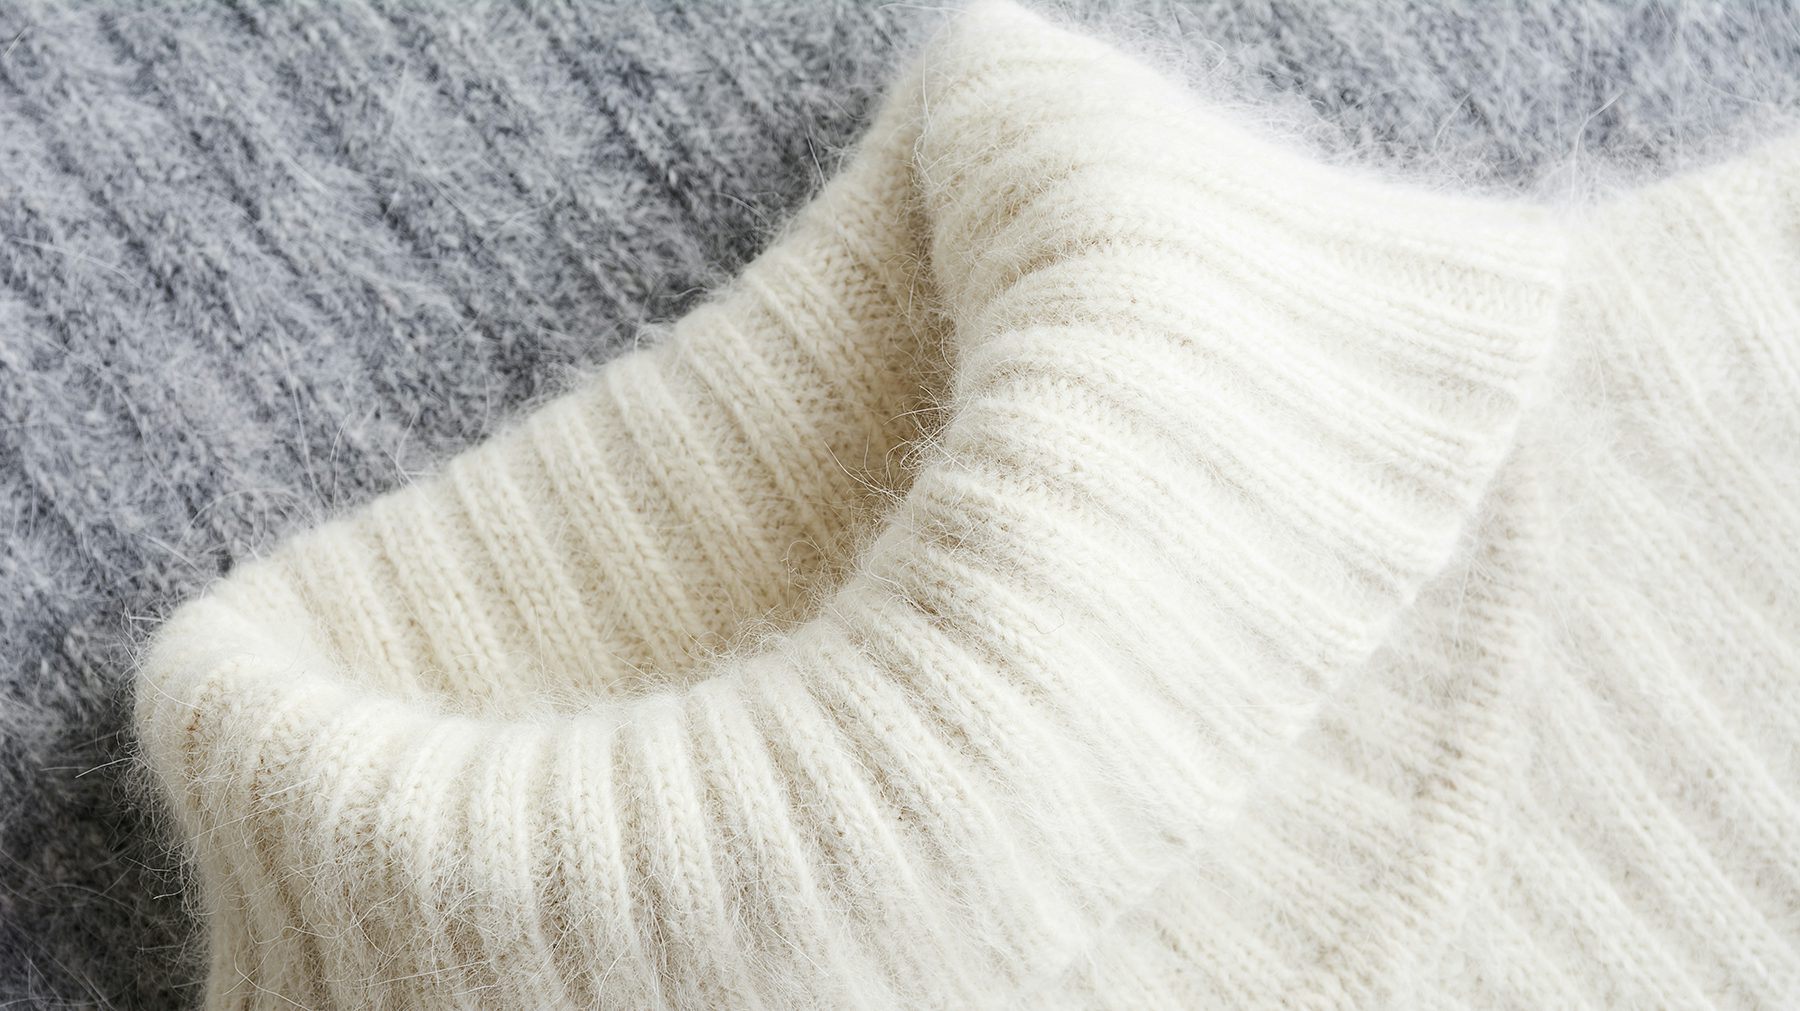 Cashmere Sweater Can Cost $2,000 or $30 